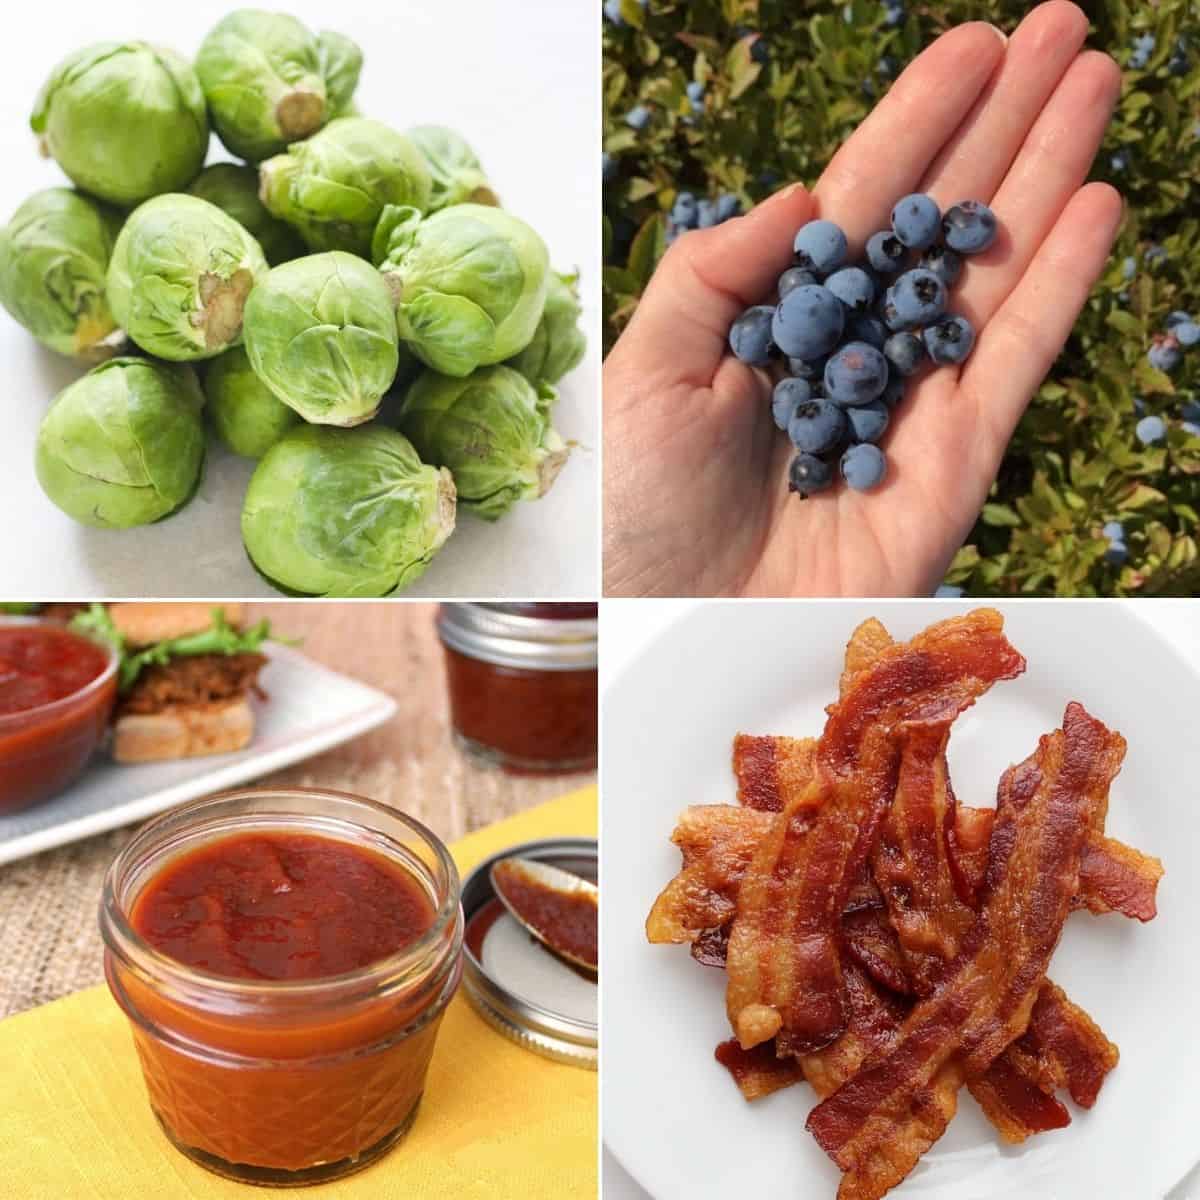 four photo collage of foods that start with B including Brussels sprouts, hand holding wild blueberries, jar of bbq sauce, and a plate of cooked bacon.